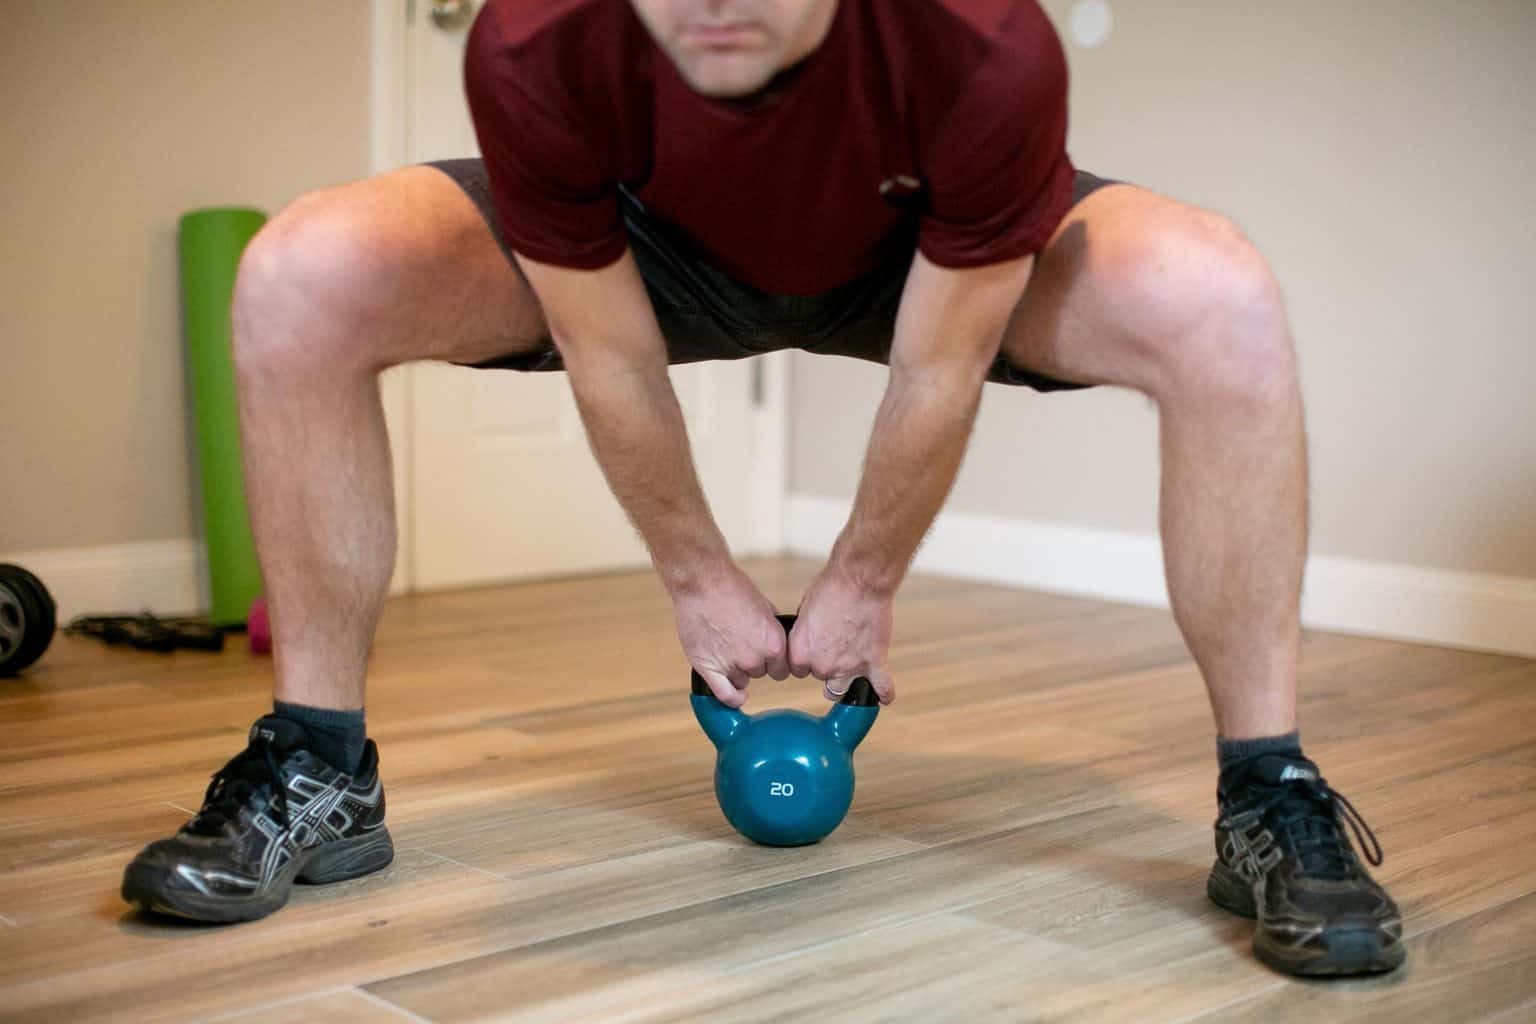 Man trying to lift a heavy kettlebell from the floor with both hands